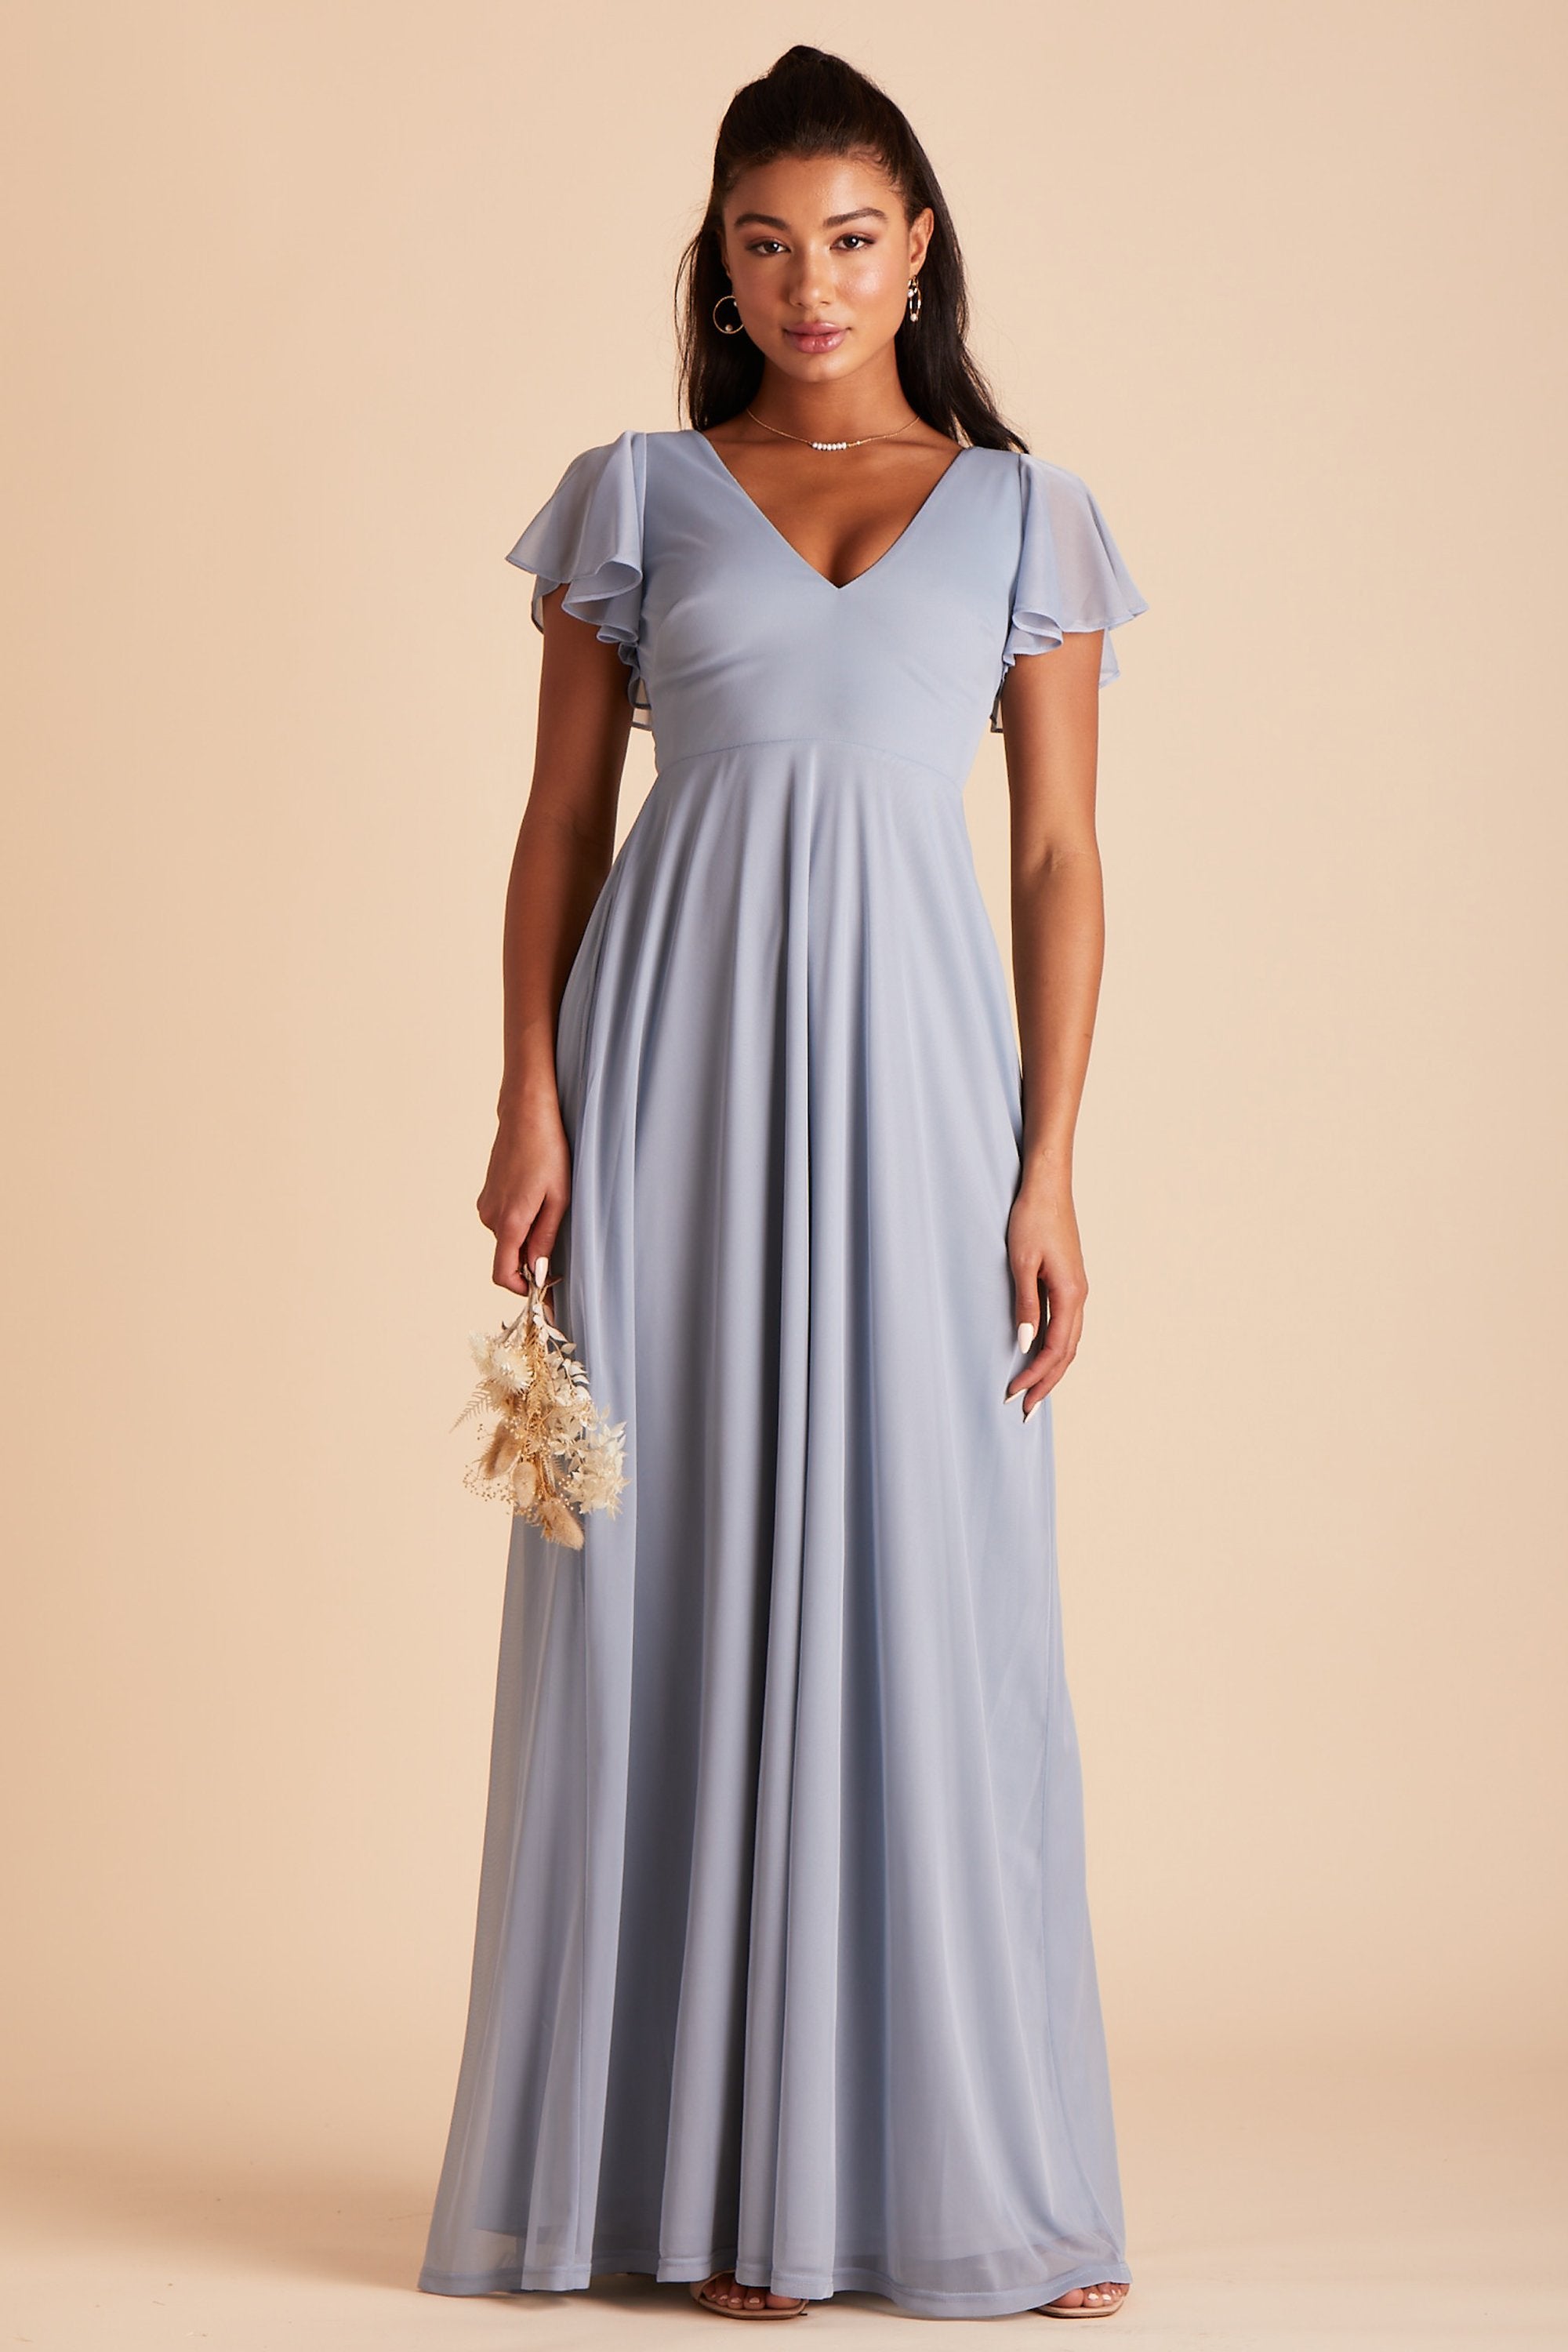 Hannah bridesmaids dress in dusty blue mesh by Birdy Grey, front view